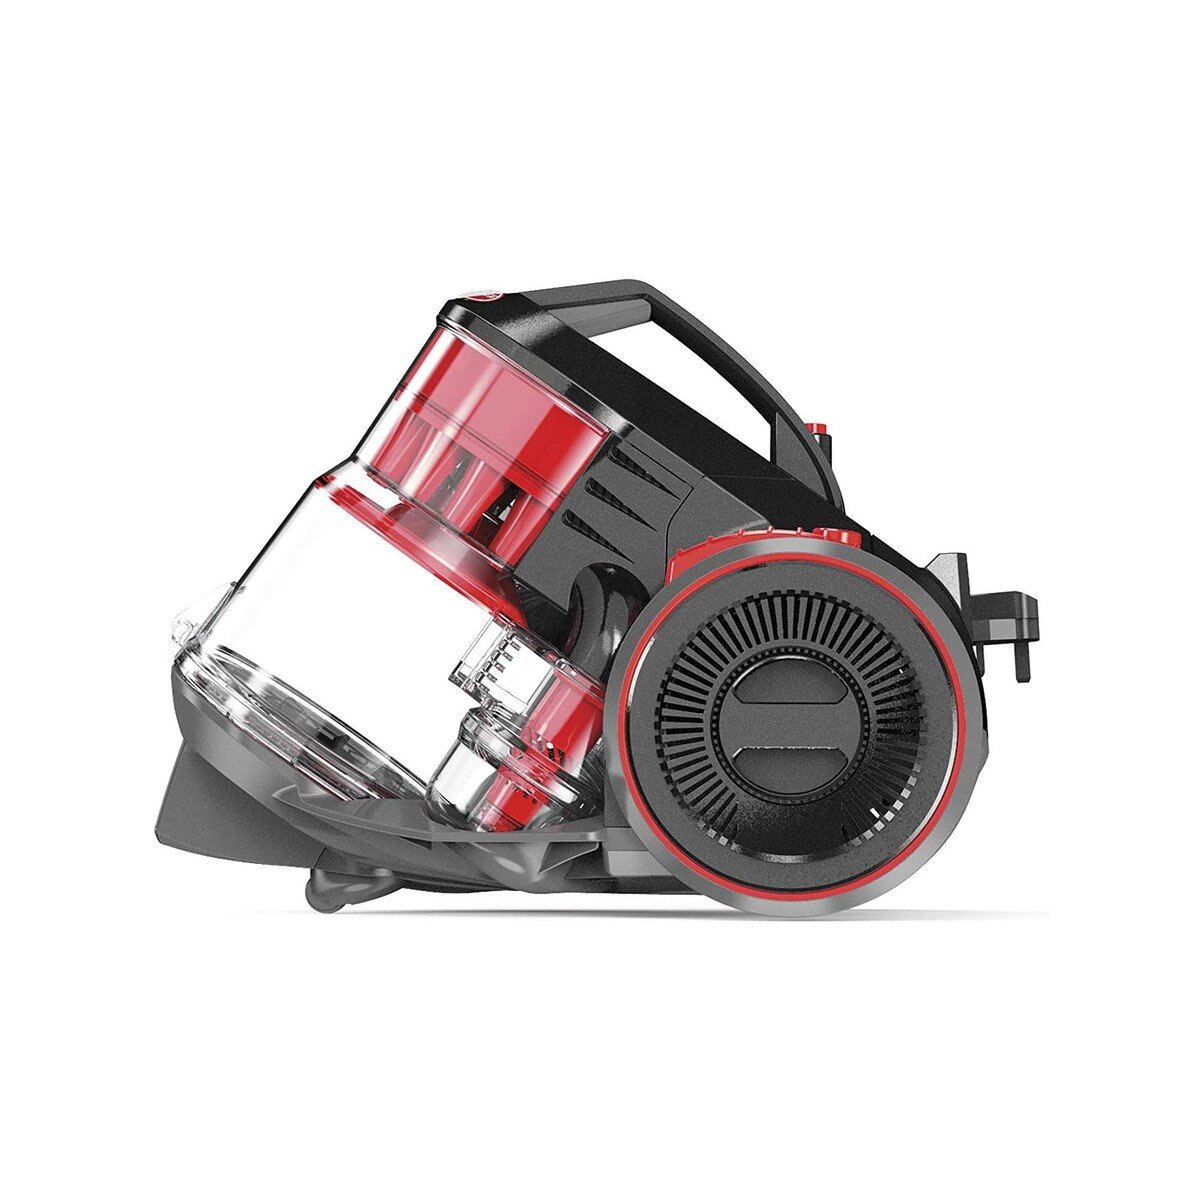 Hoover Canister Vaccum Cleaner HC88-MAM 1500W